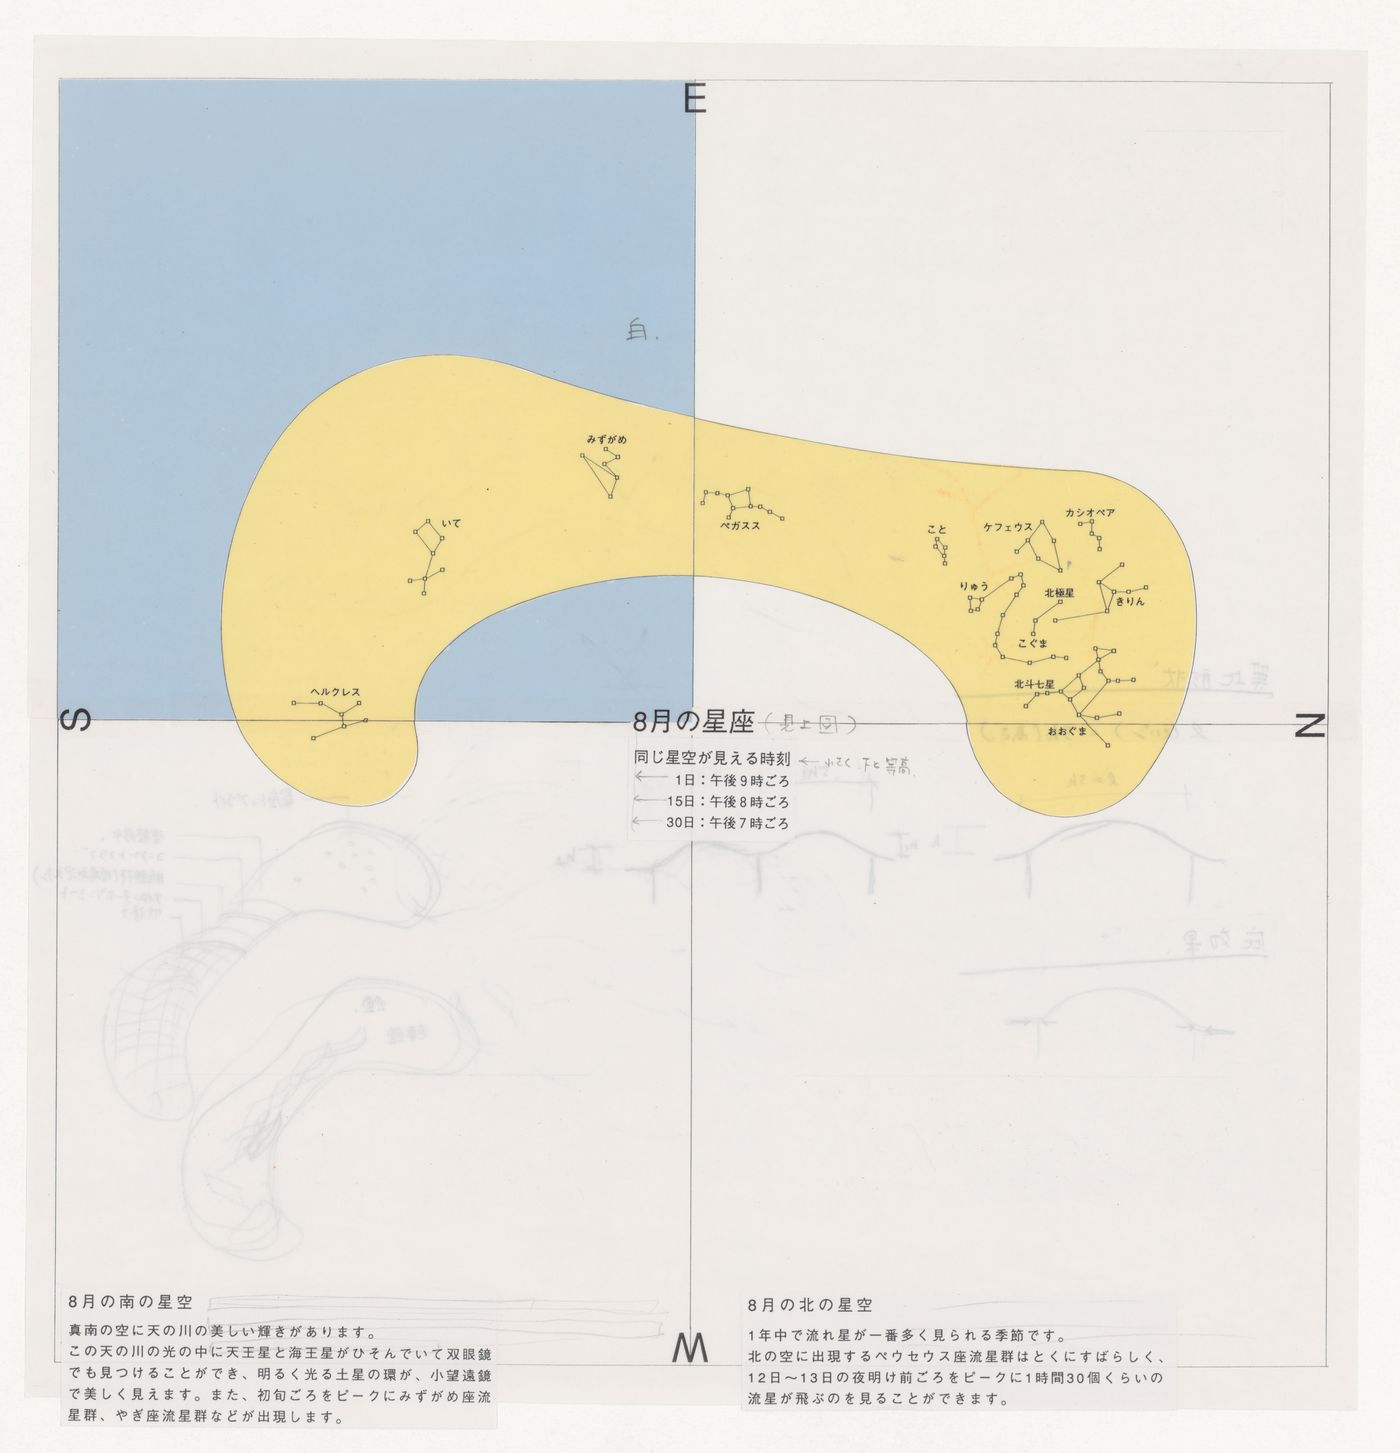 Roof plan and sketches for Uchino Community Center for Seniors and Children, Fukuoka, Japan